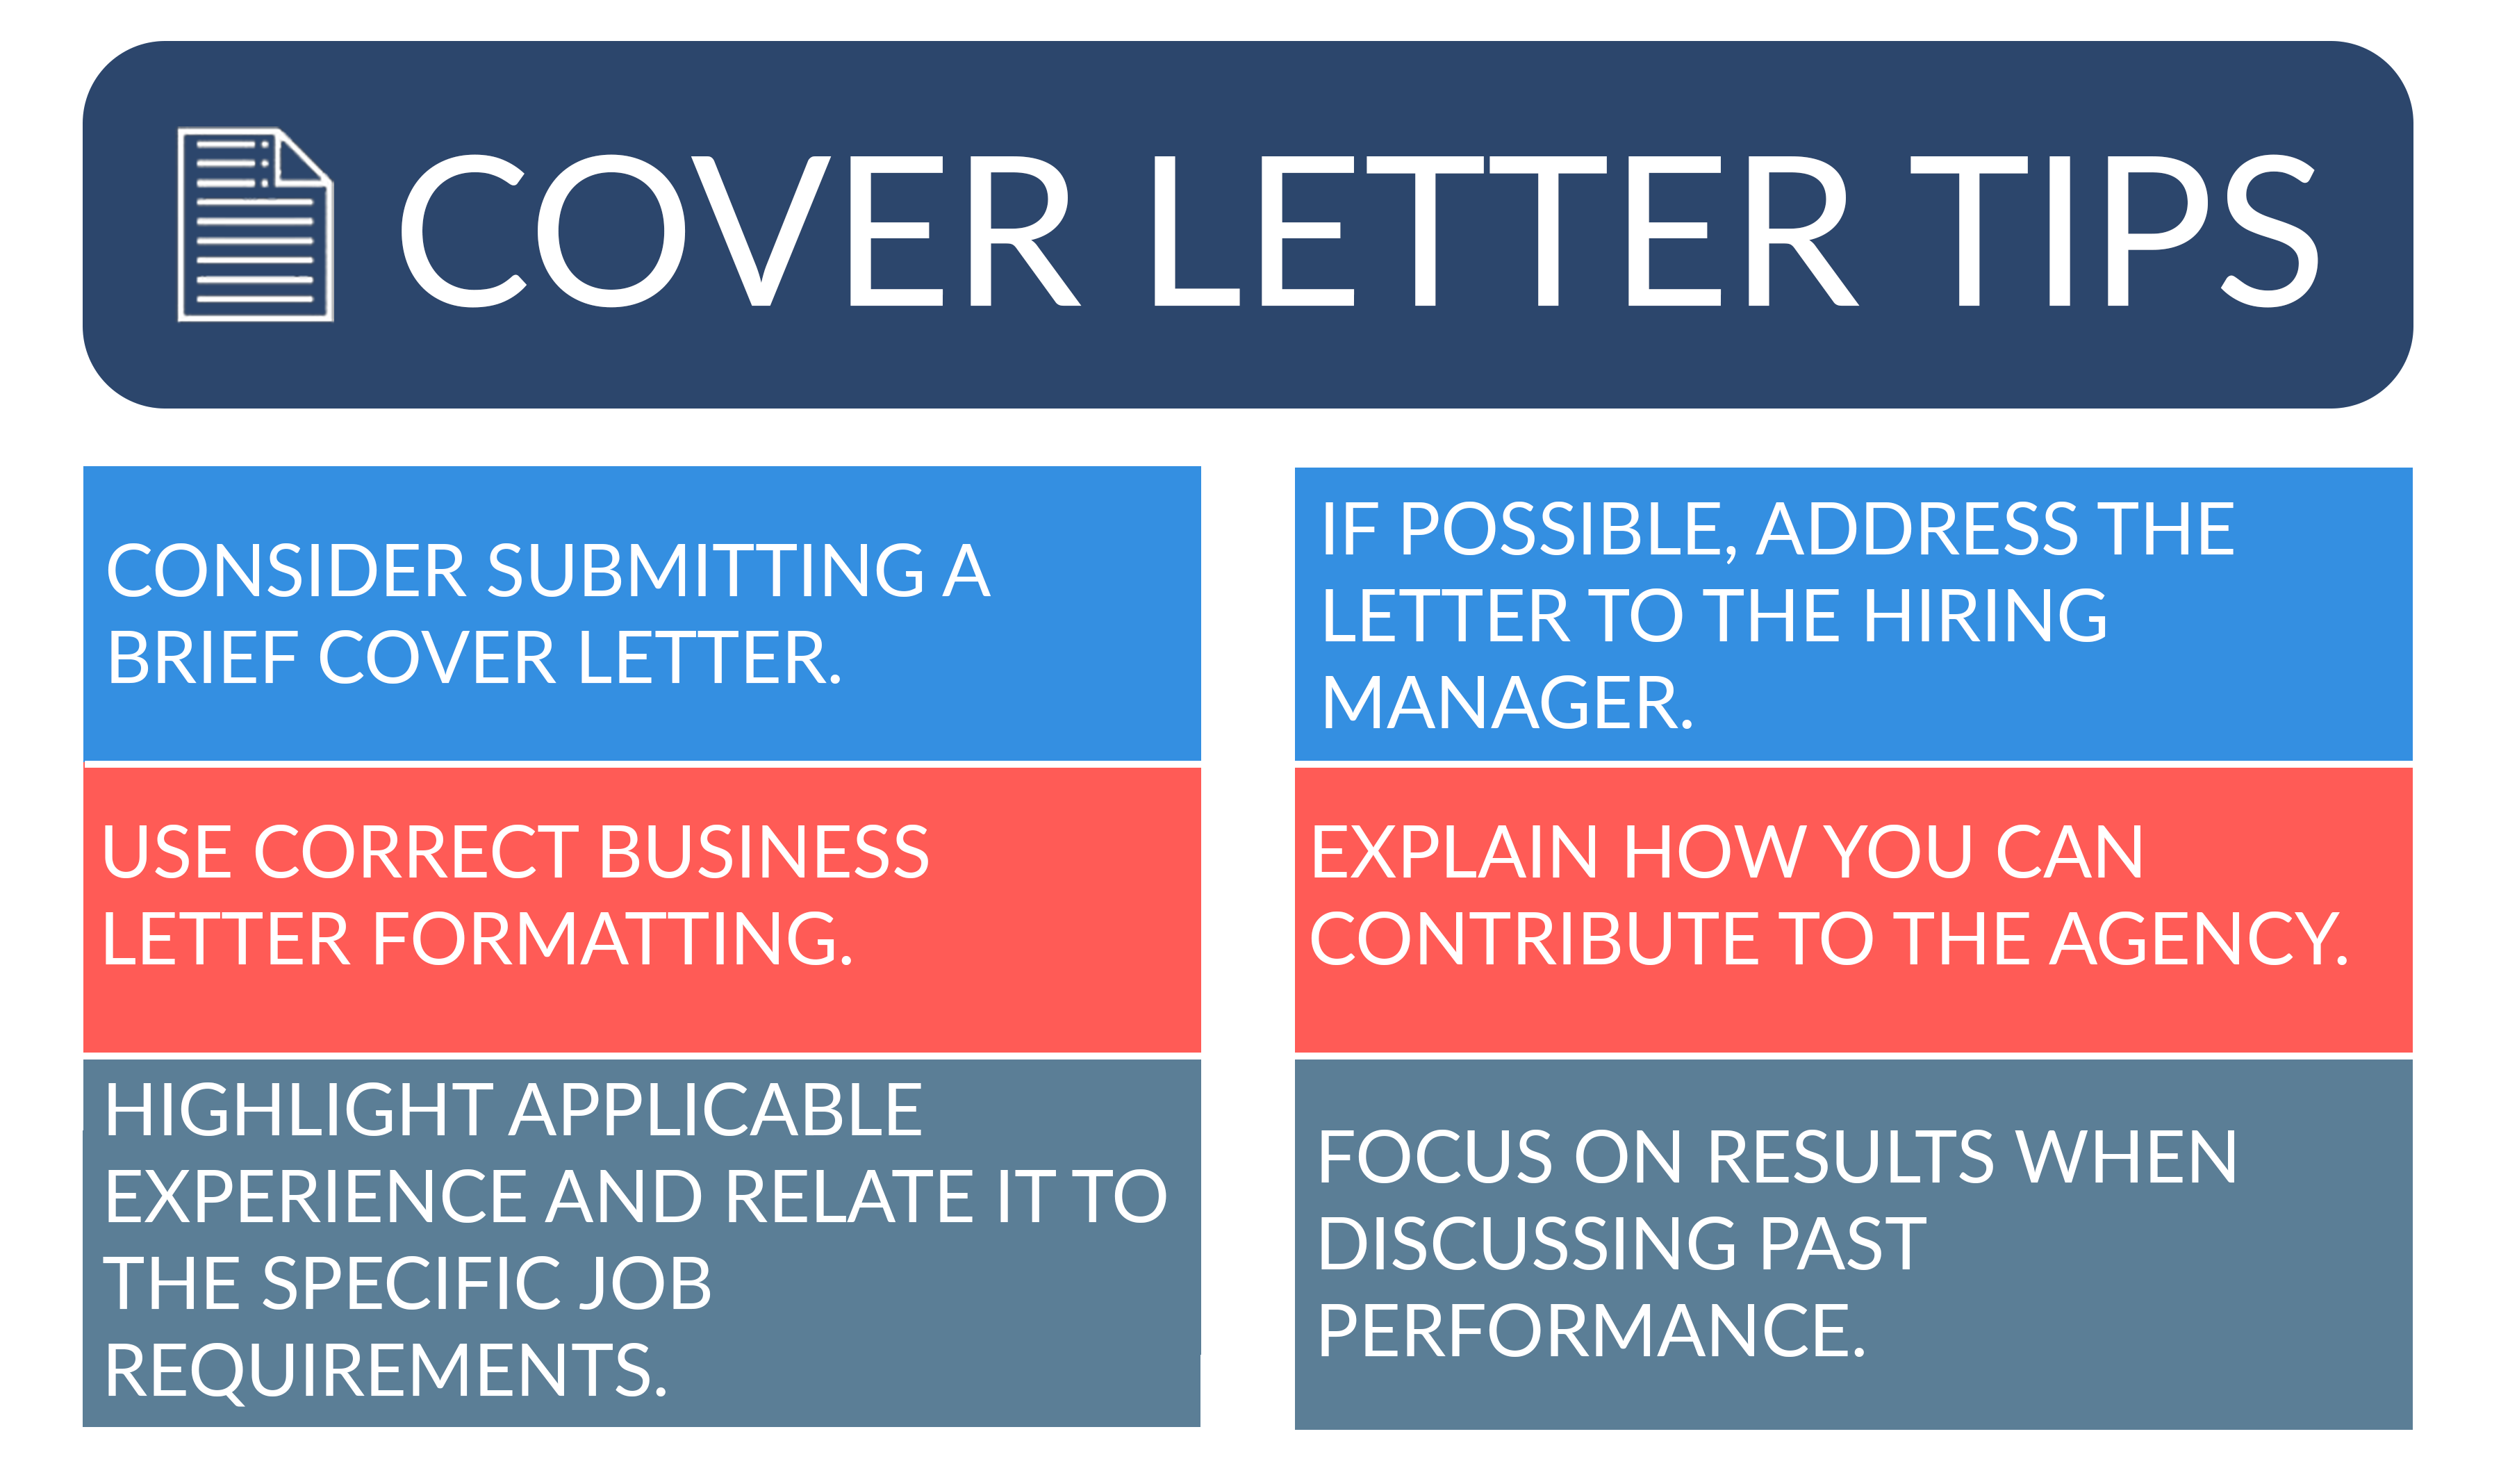 Cover Letter Tips Consider Submitting a Brief Cover Letter, If Possible, Address the Letter to the Hiring Manager, Use Correct Business Letter Formatting, Explain How you can Contribute to the Agency, Highlight Applicable Experience and Relate it to the Specific Job Requirements, Focus on When Discussing Past Performance.